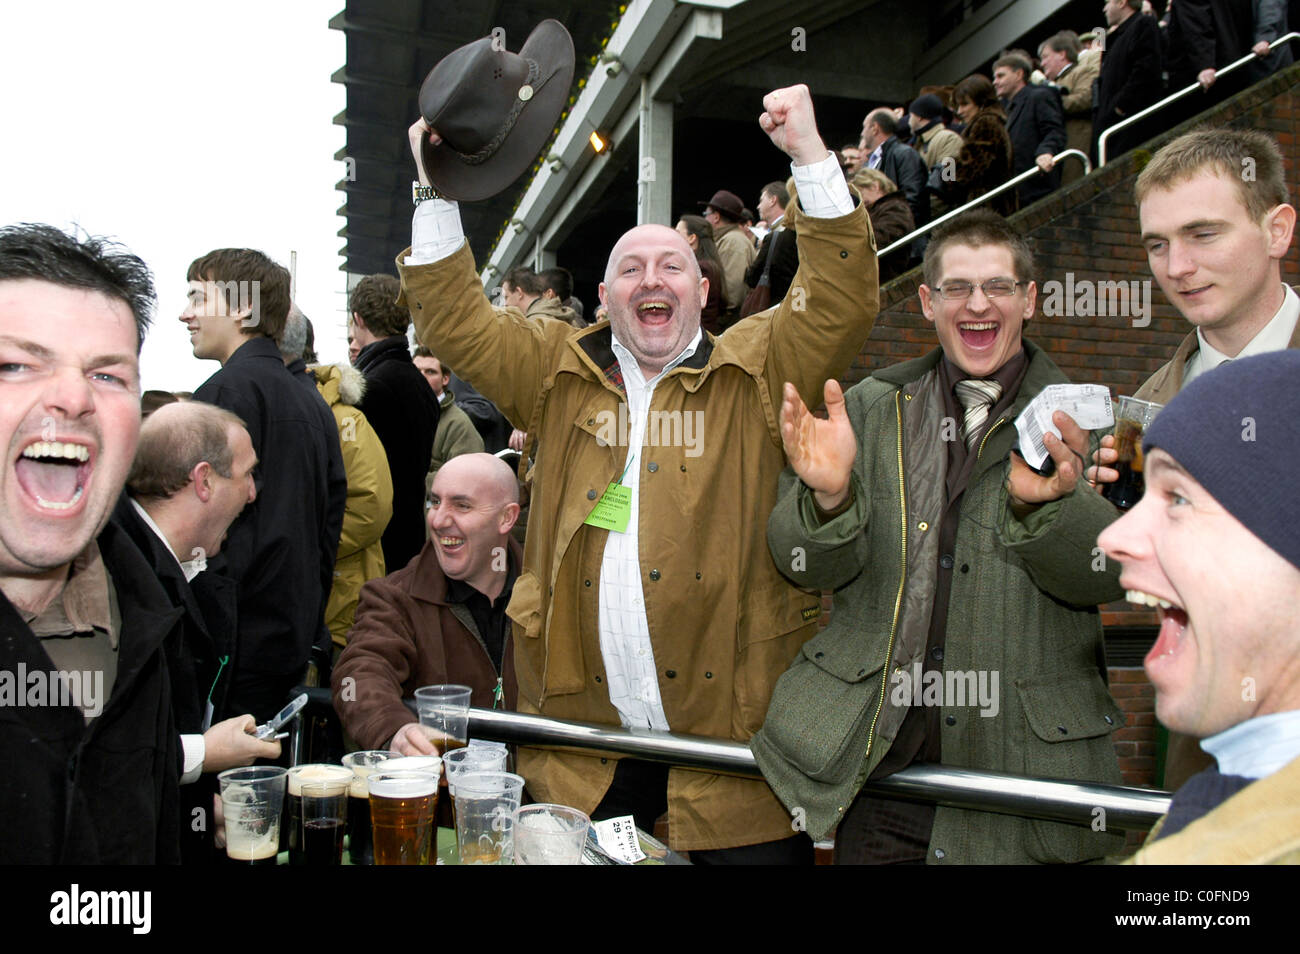 A group of men jumping for joy after watching the horse they bet on win at Cheltenham races. Stock Photo